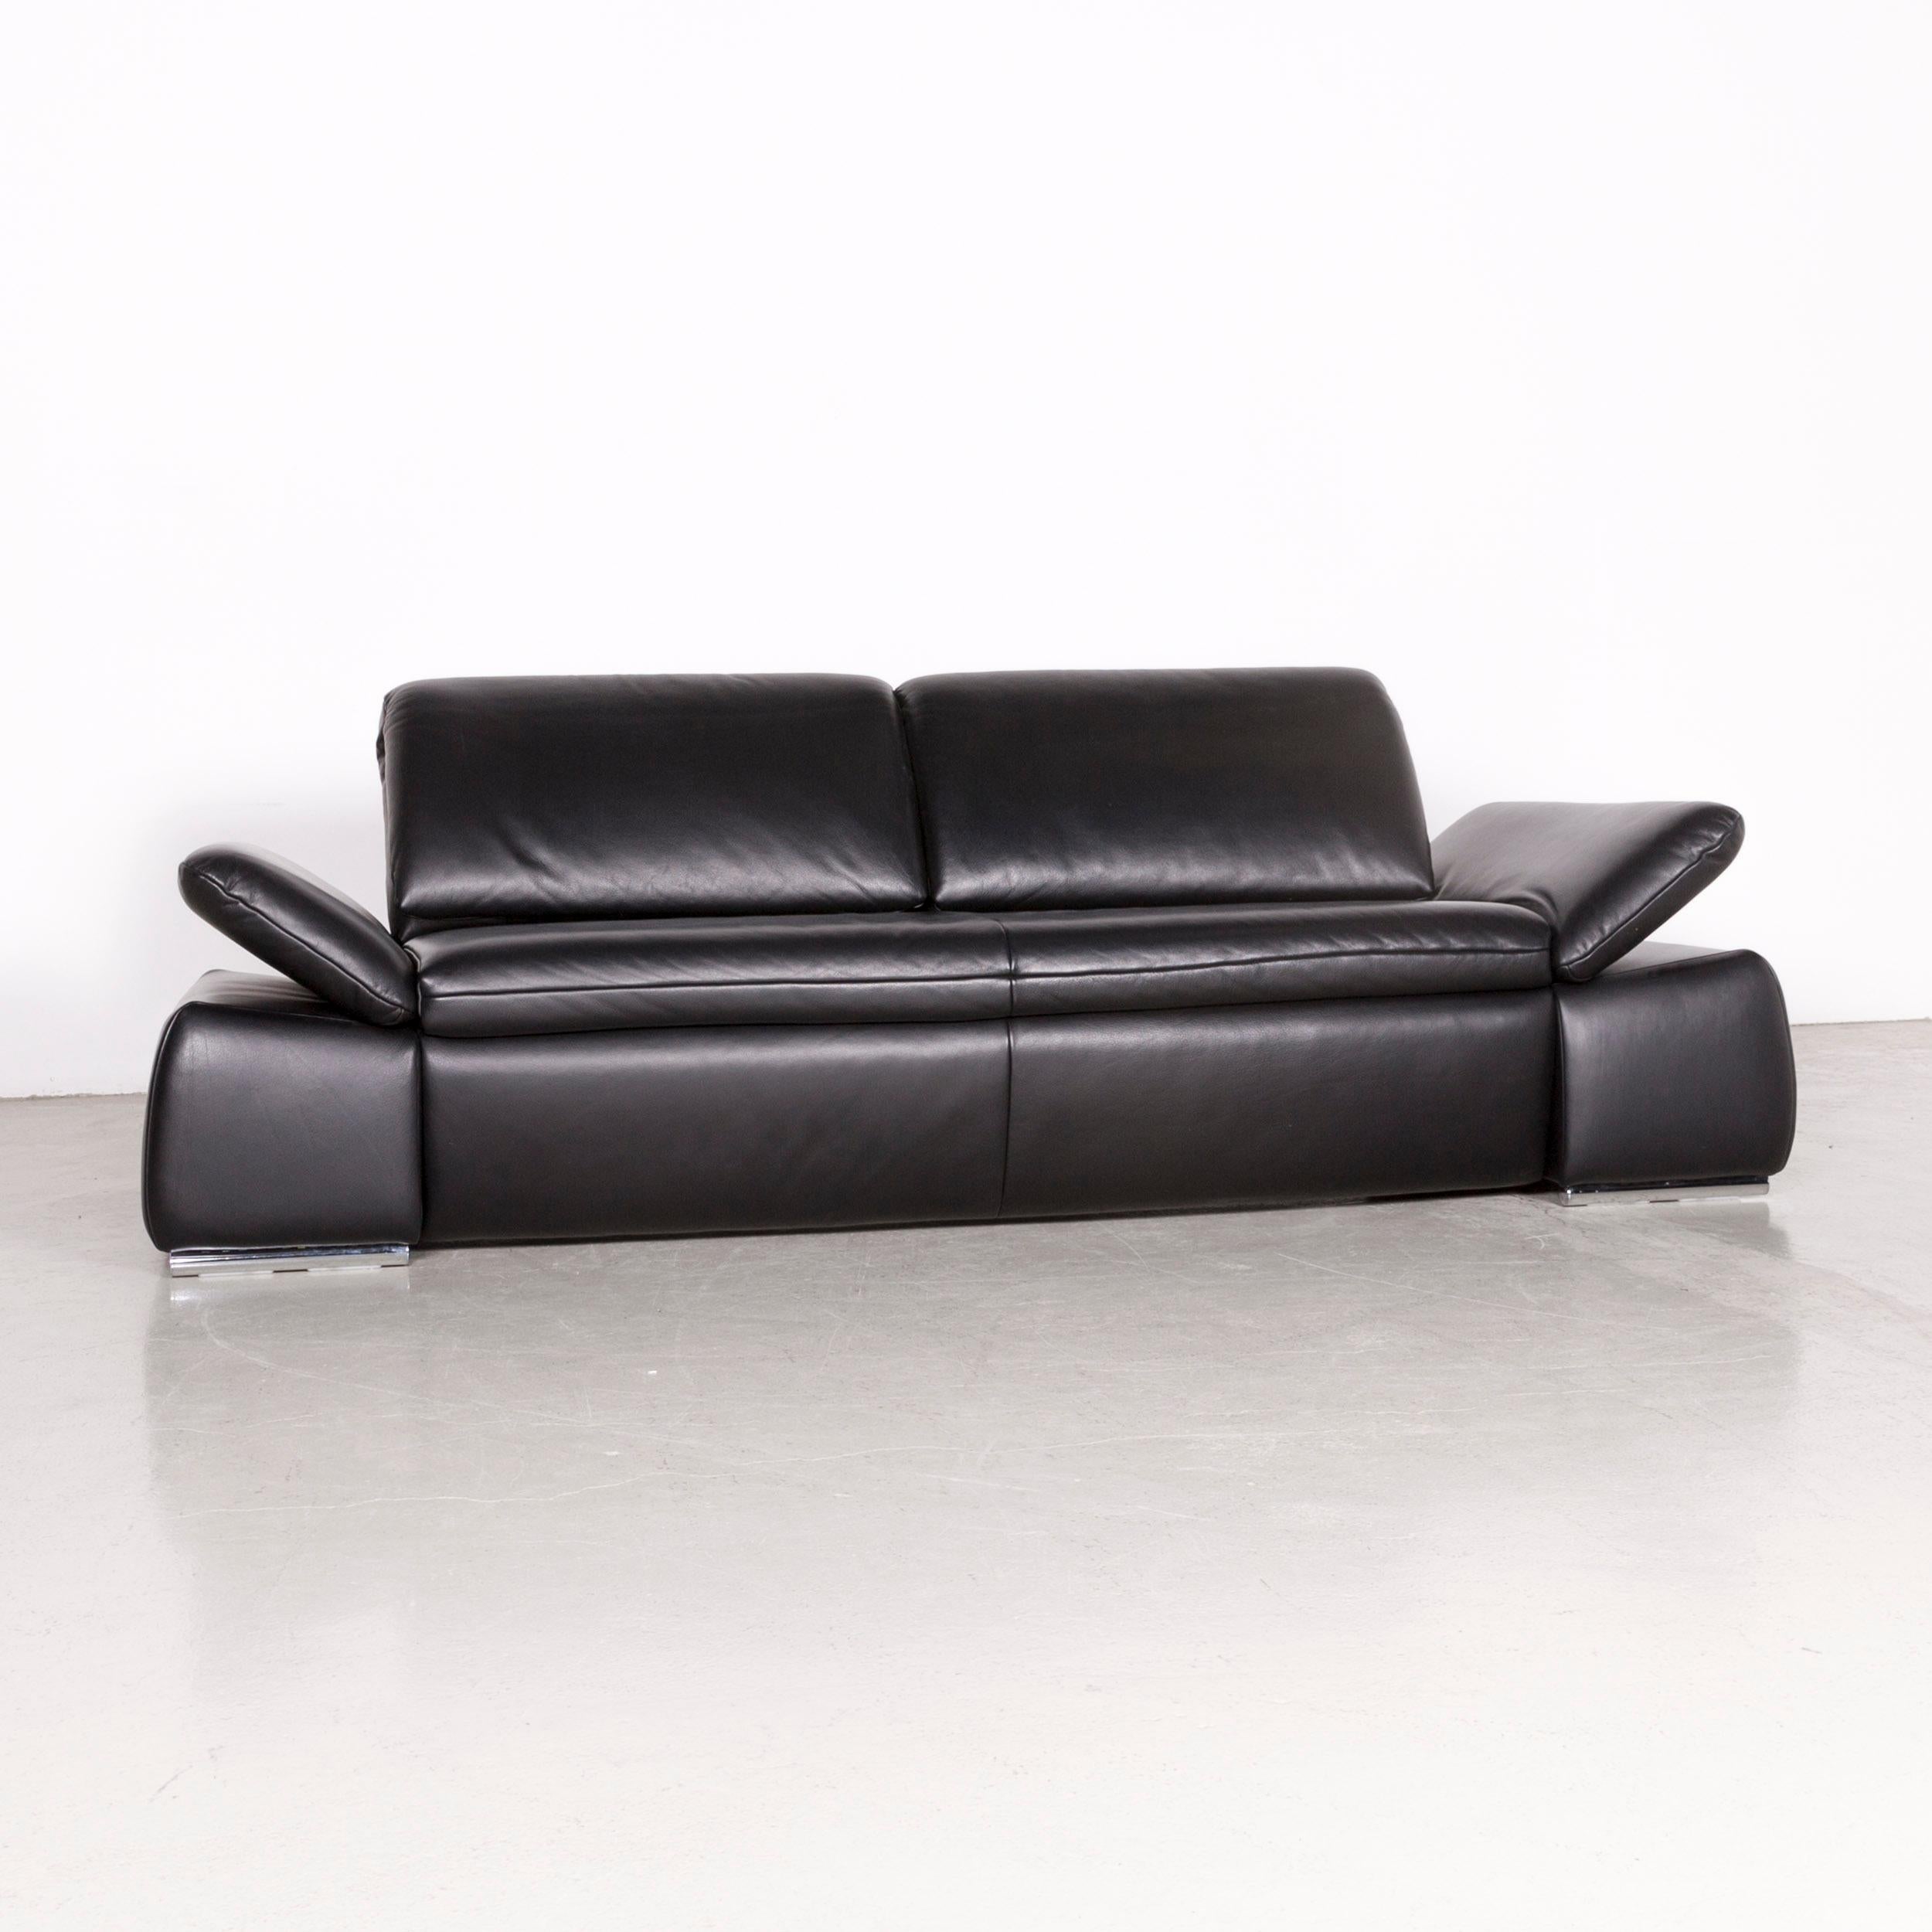 German Koinor Evento Designer Sofa Black Three-Seat Leather Couch For Sale